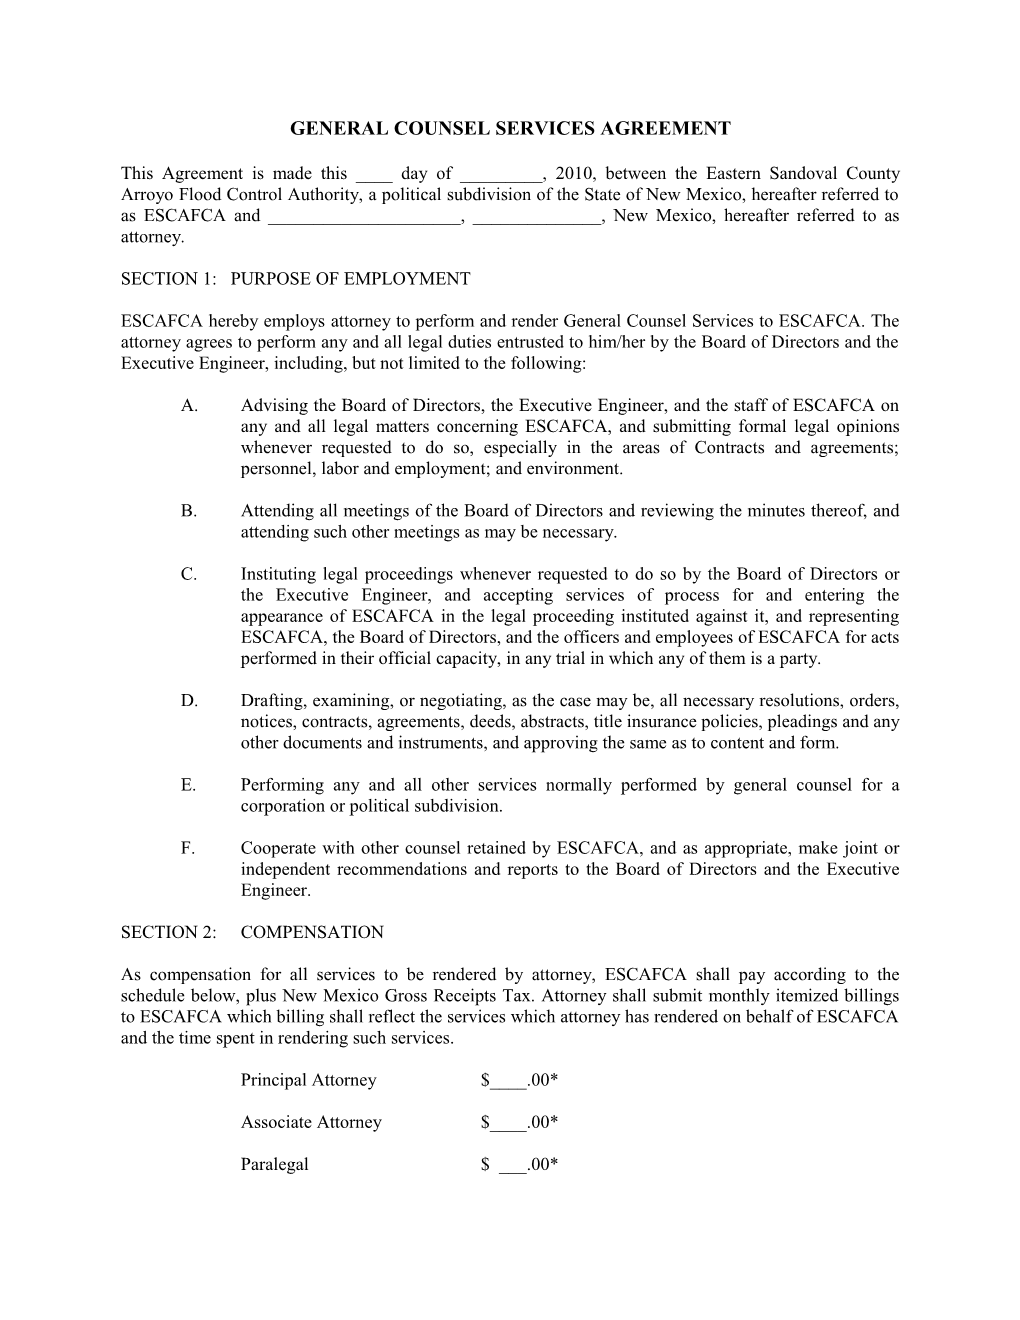 Sample Legal Services Agreement - General Counsel Services